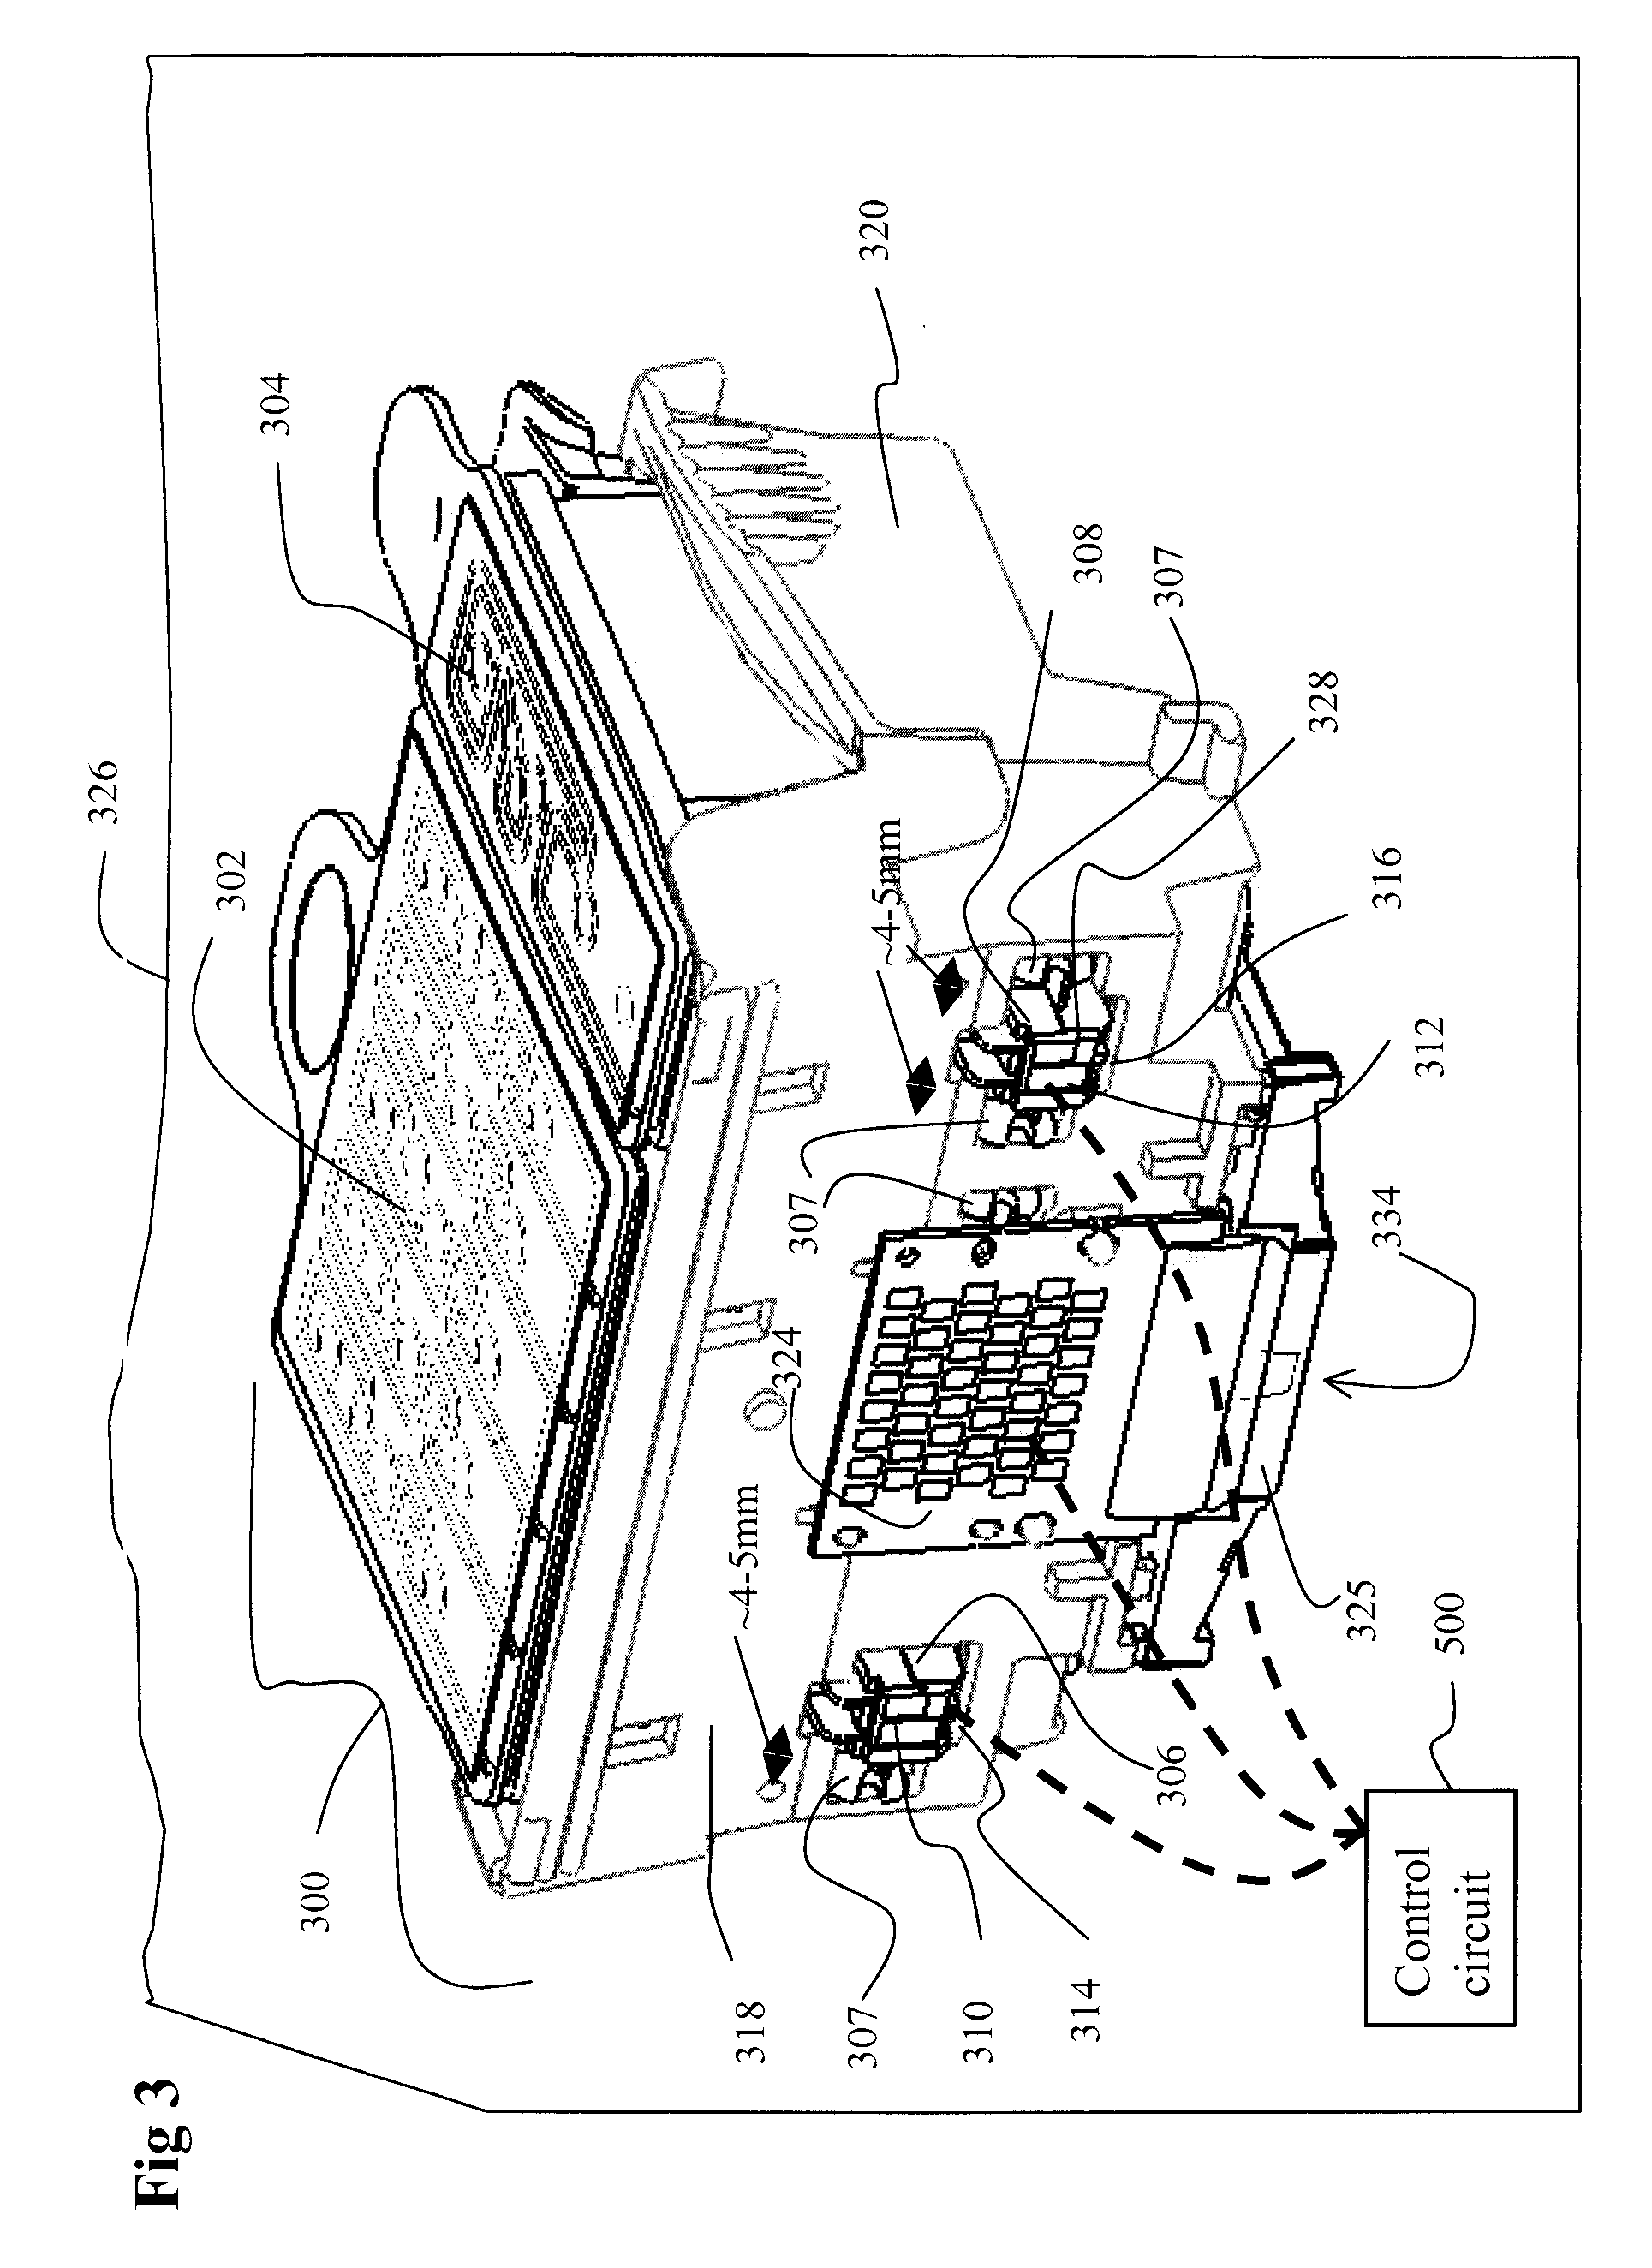 Data storage device mounting arrangement for printing device